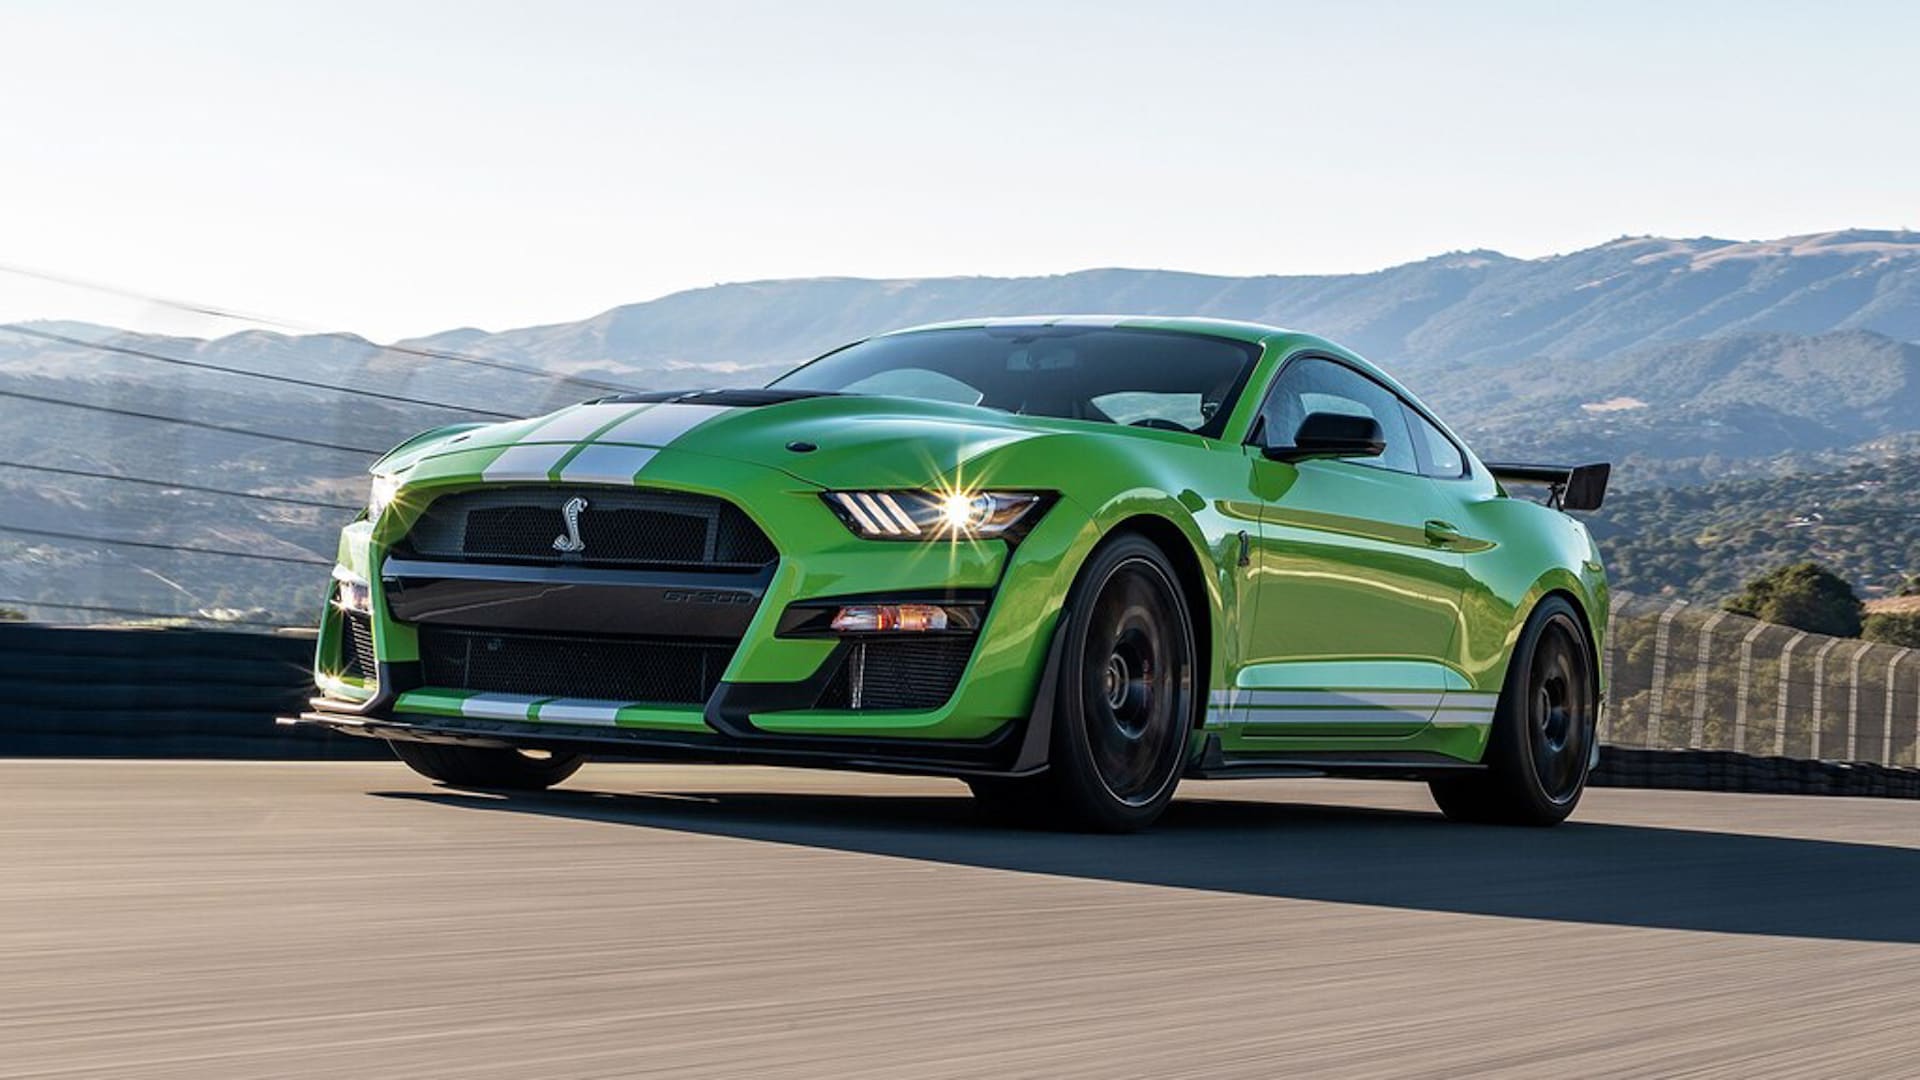 2021 Ford Mustang Prices, Reviews, and Photos - MotorTrend